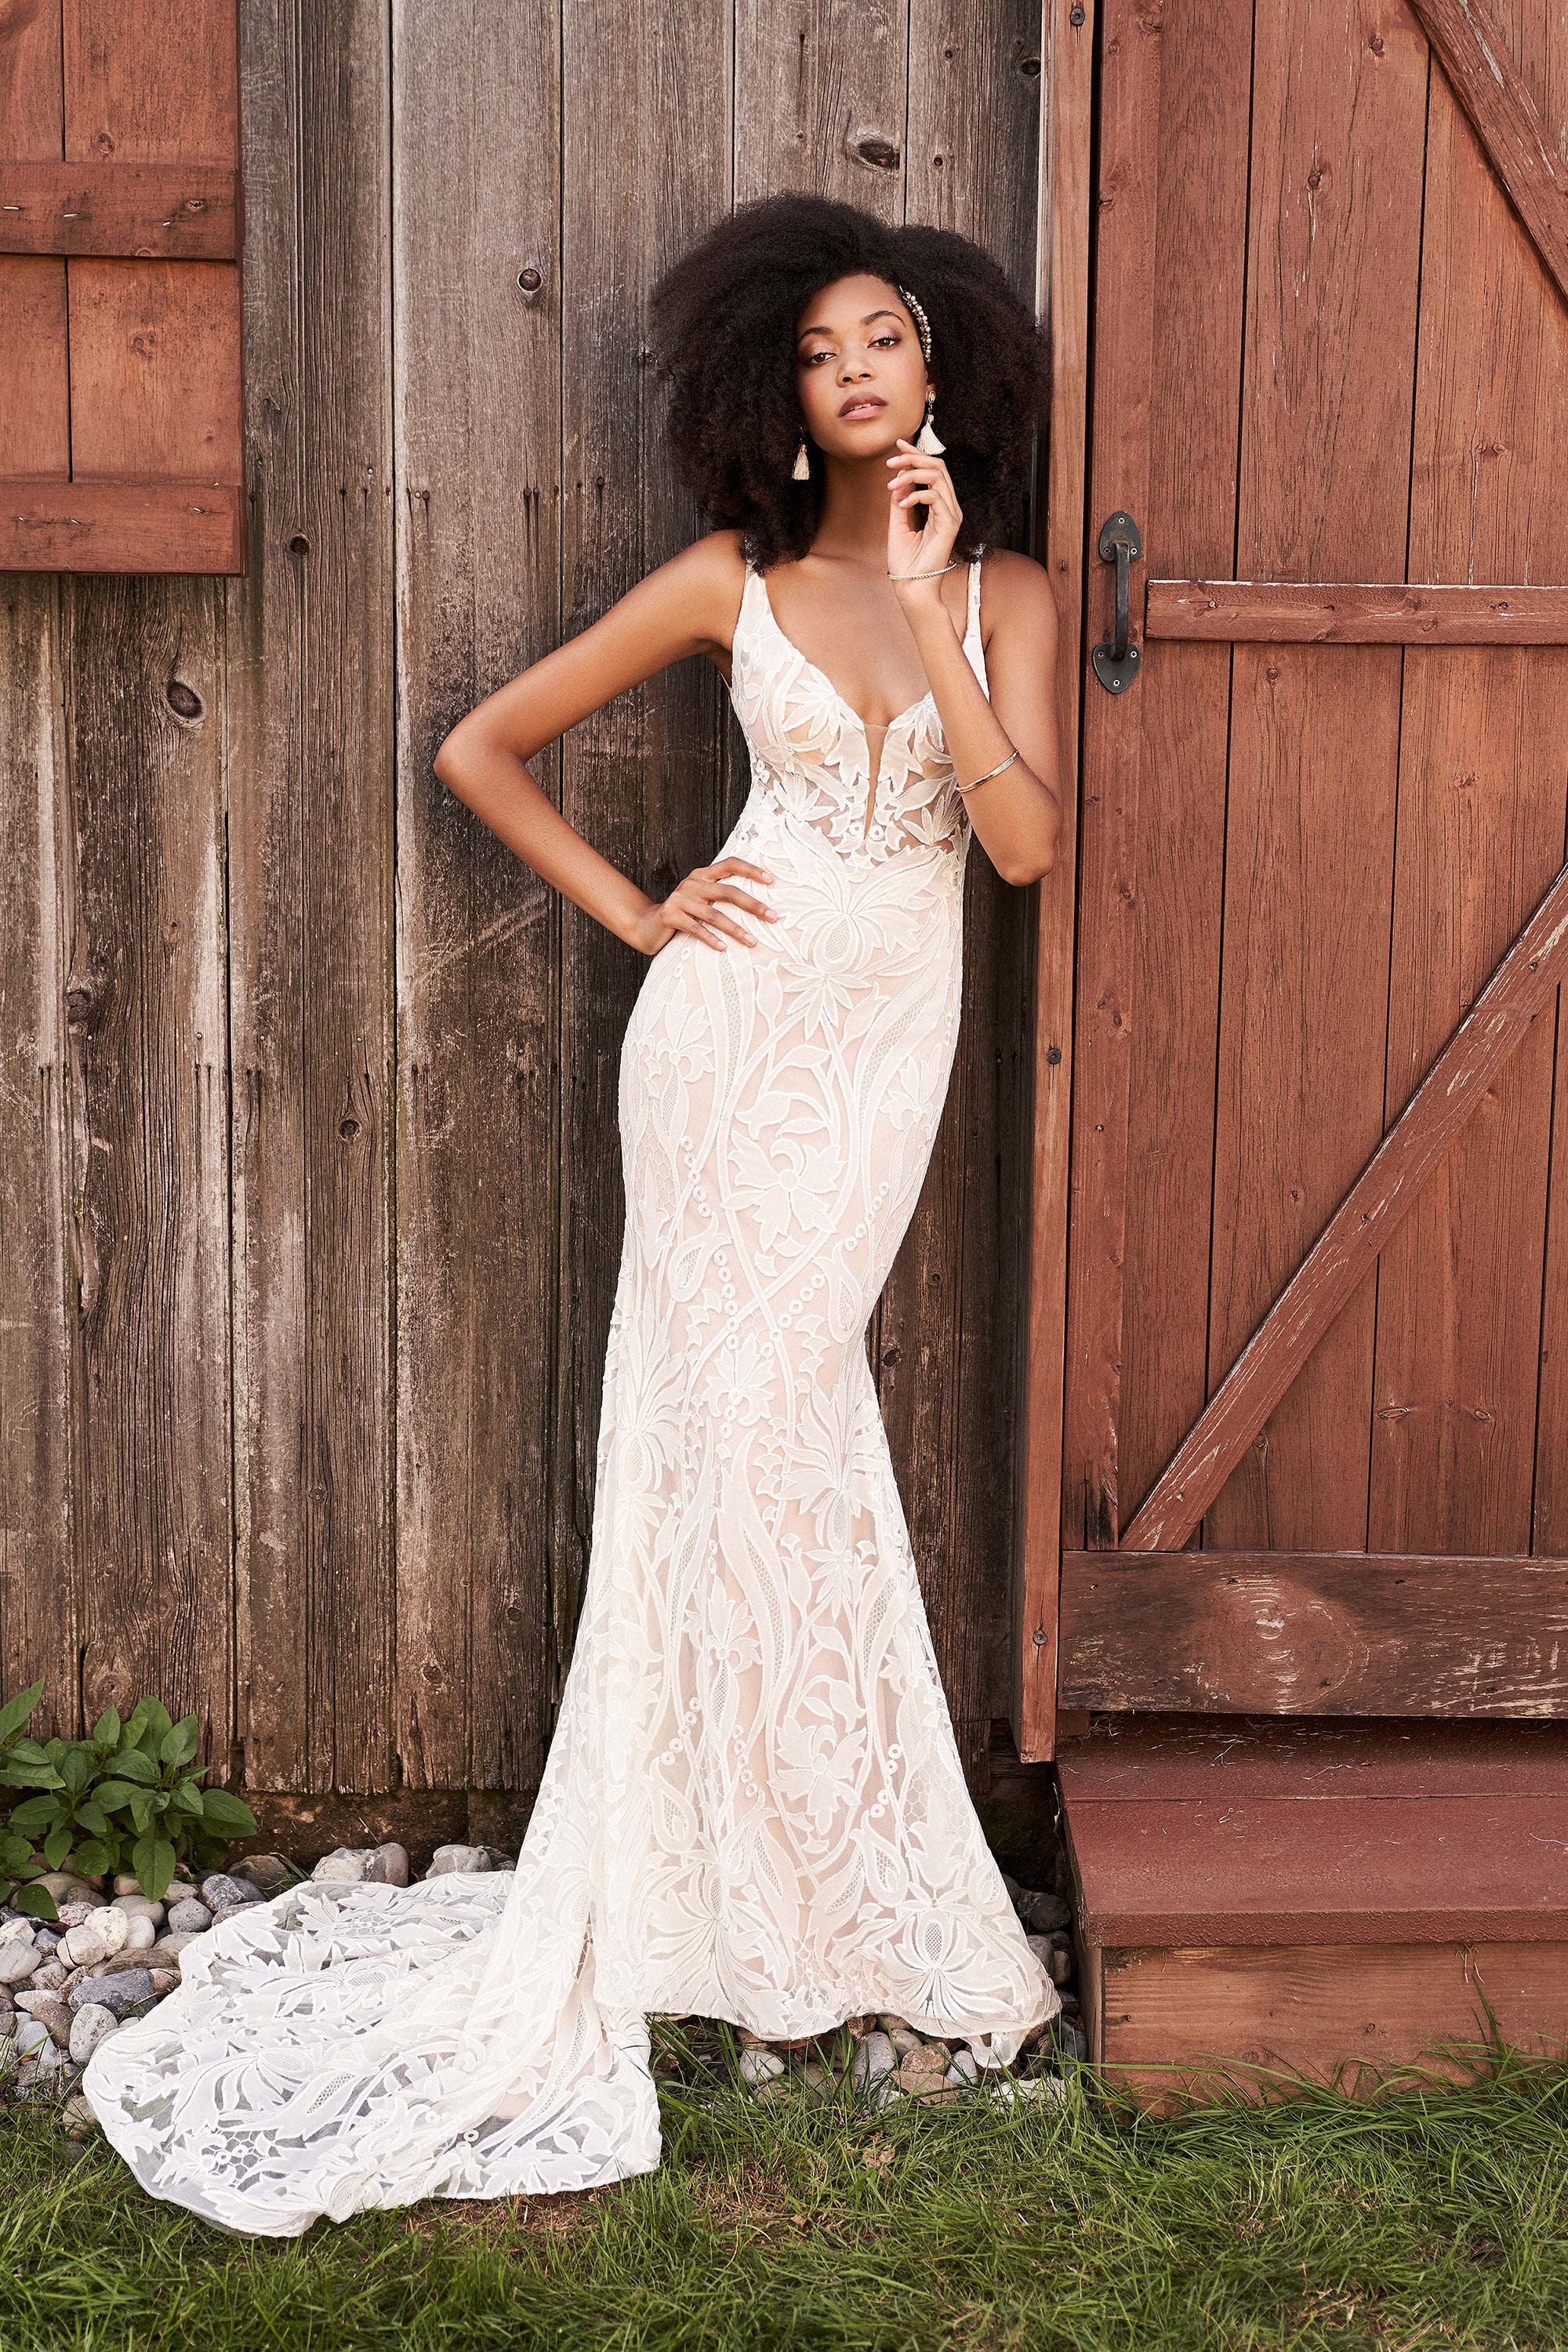 Plunging V-Neck Wedding Dress with Chiffon all-over Lace by Lillian West -  66187